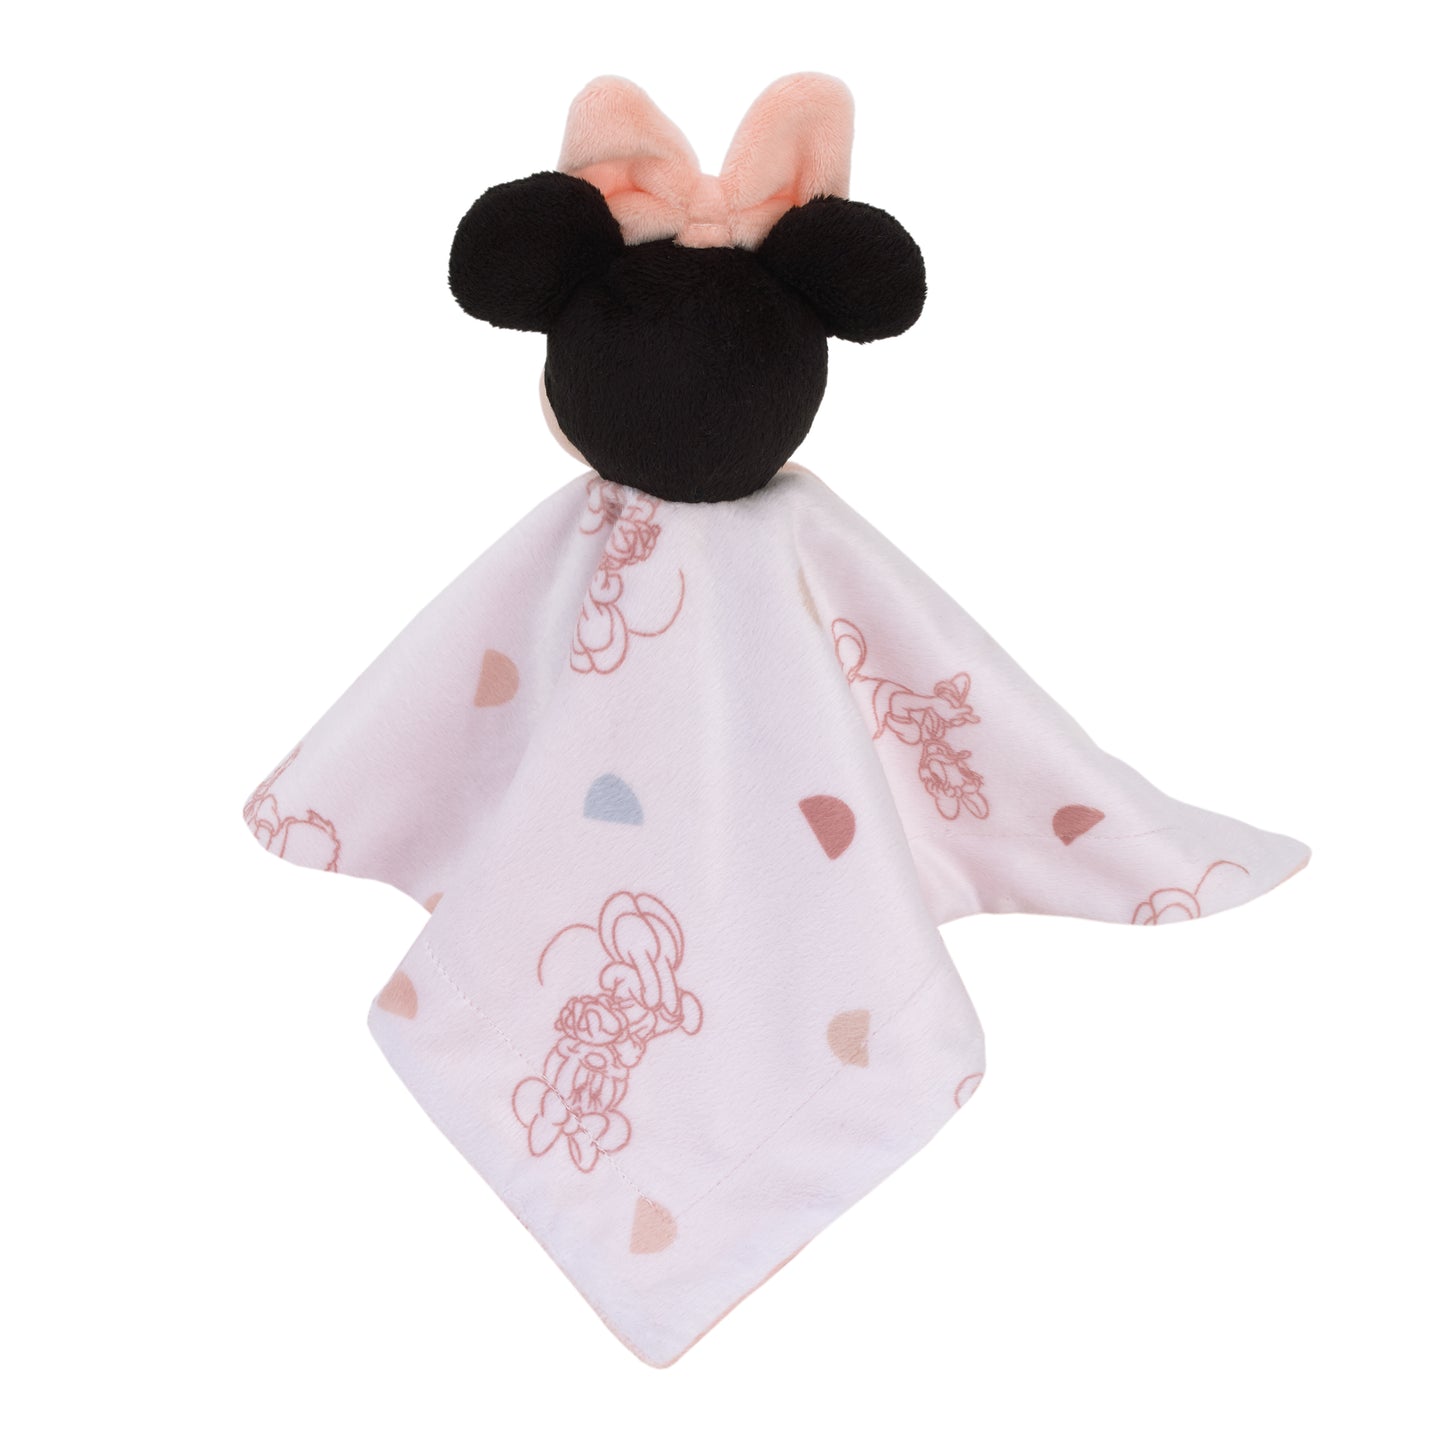 Disney Minnie Mouse White, Light Blue, and Peach Super Soft Security Baby Blanket with Plush Minnie Mouse Head